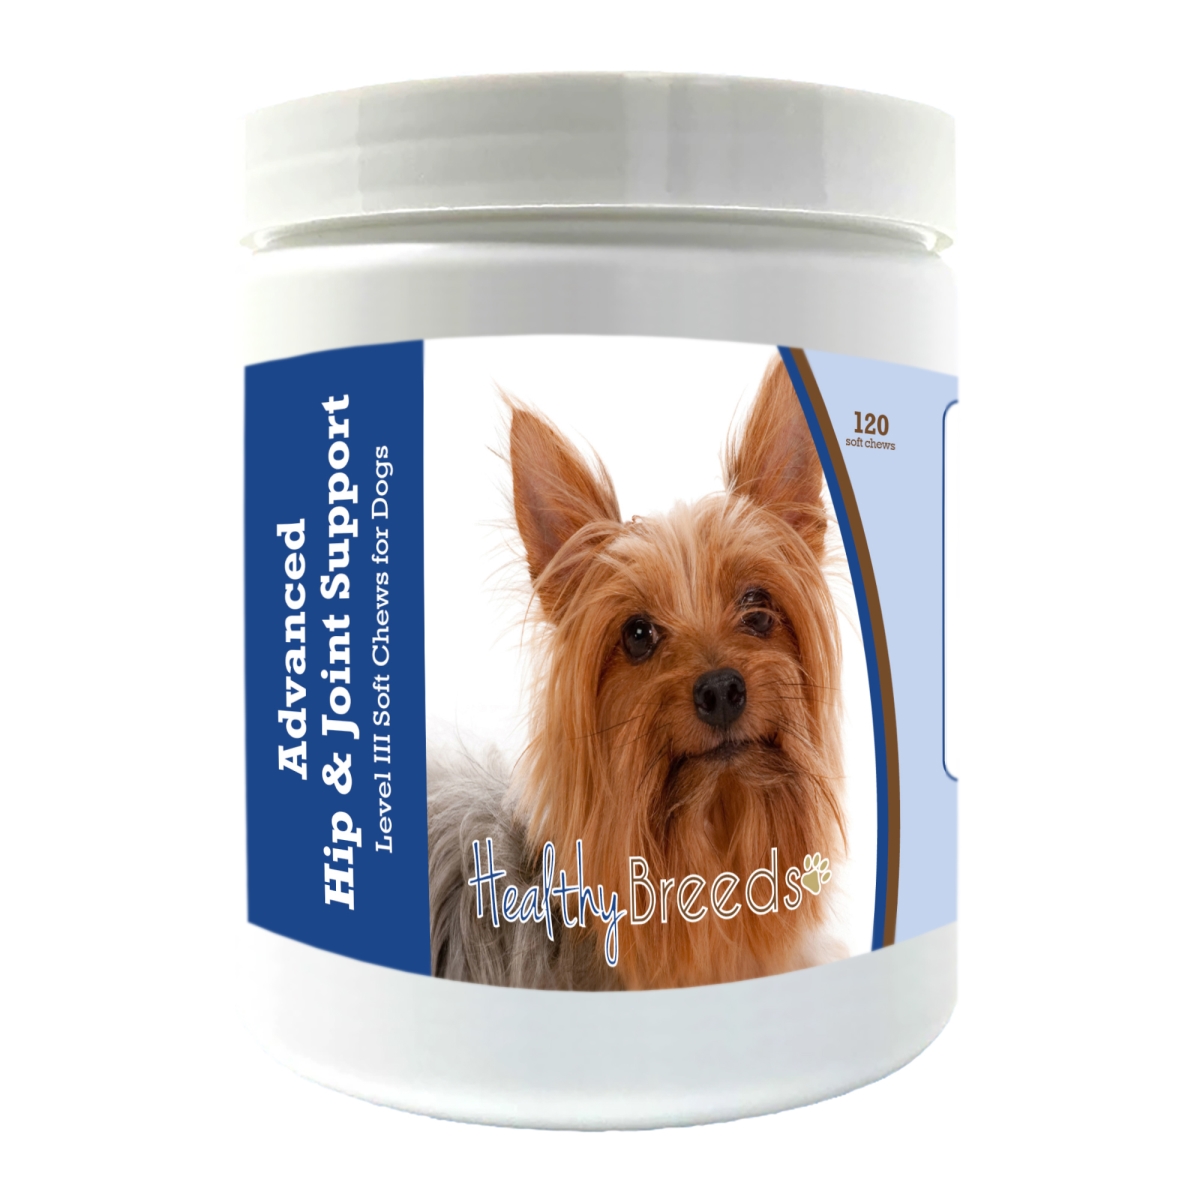 Picture of Healthy Breeds 192959899252 Silky Terrier Advanced Hip & Joint Support Level III Soft Chews for Dogs